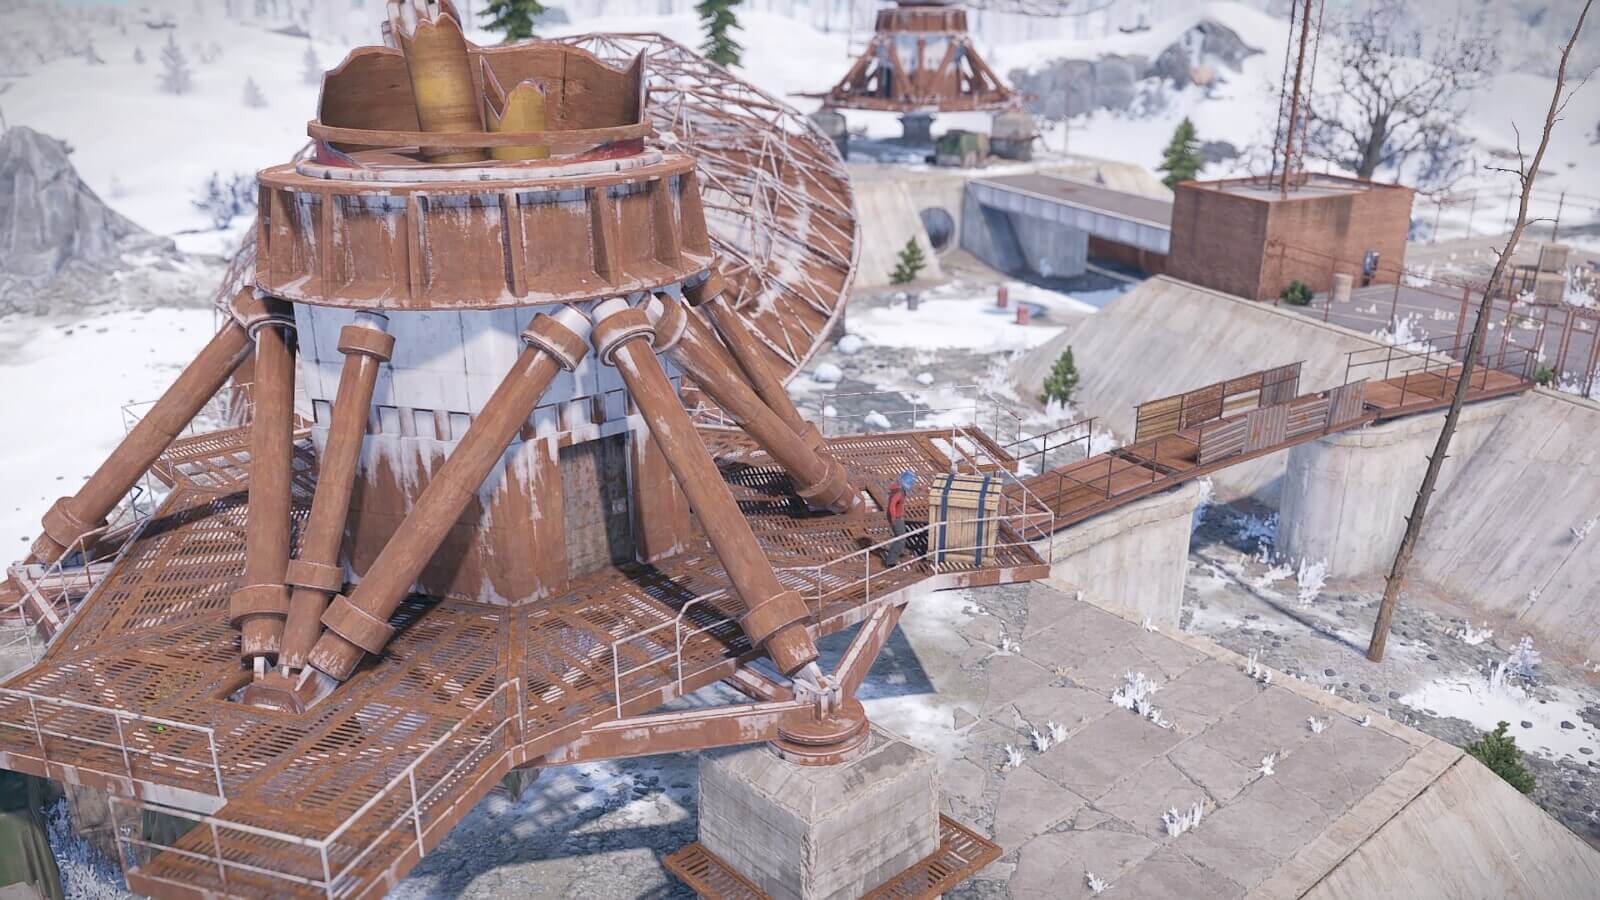 On the broken satellite you'll find a crate spawn on the top walkway along with some barrels nearby.